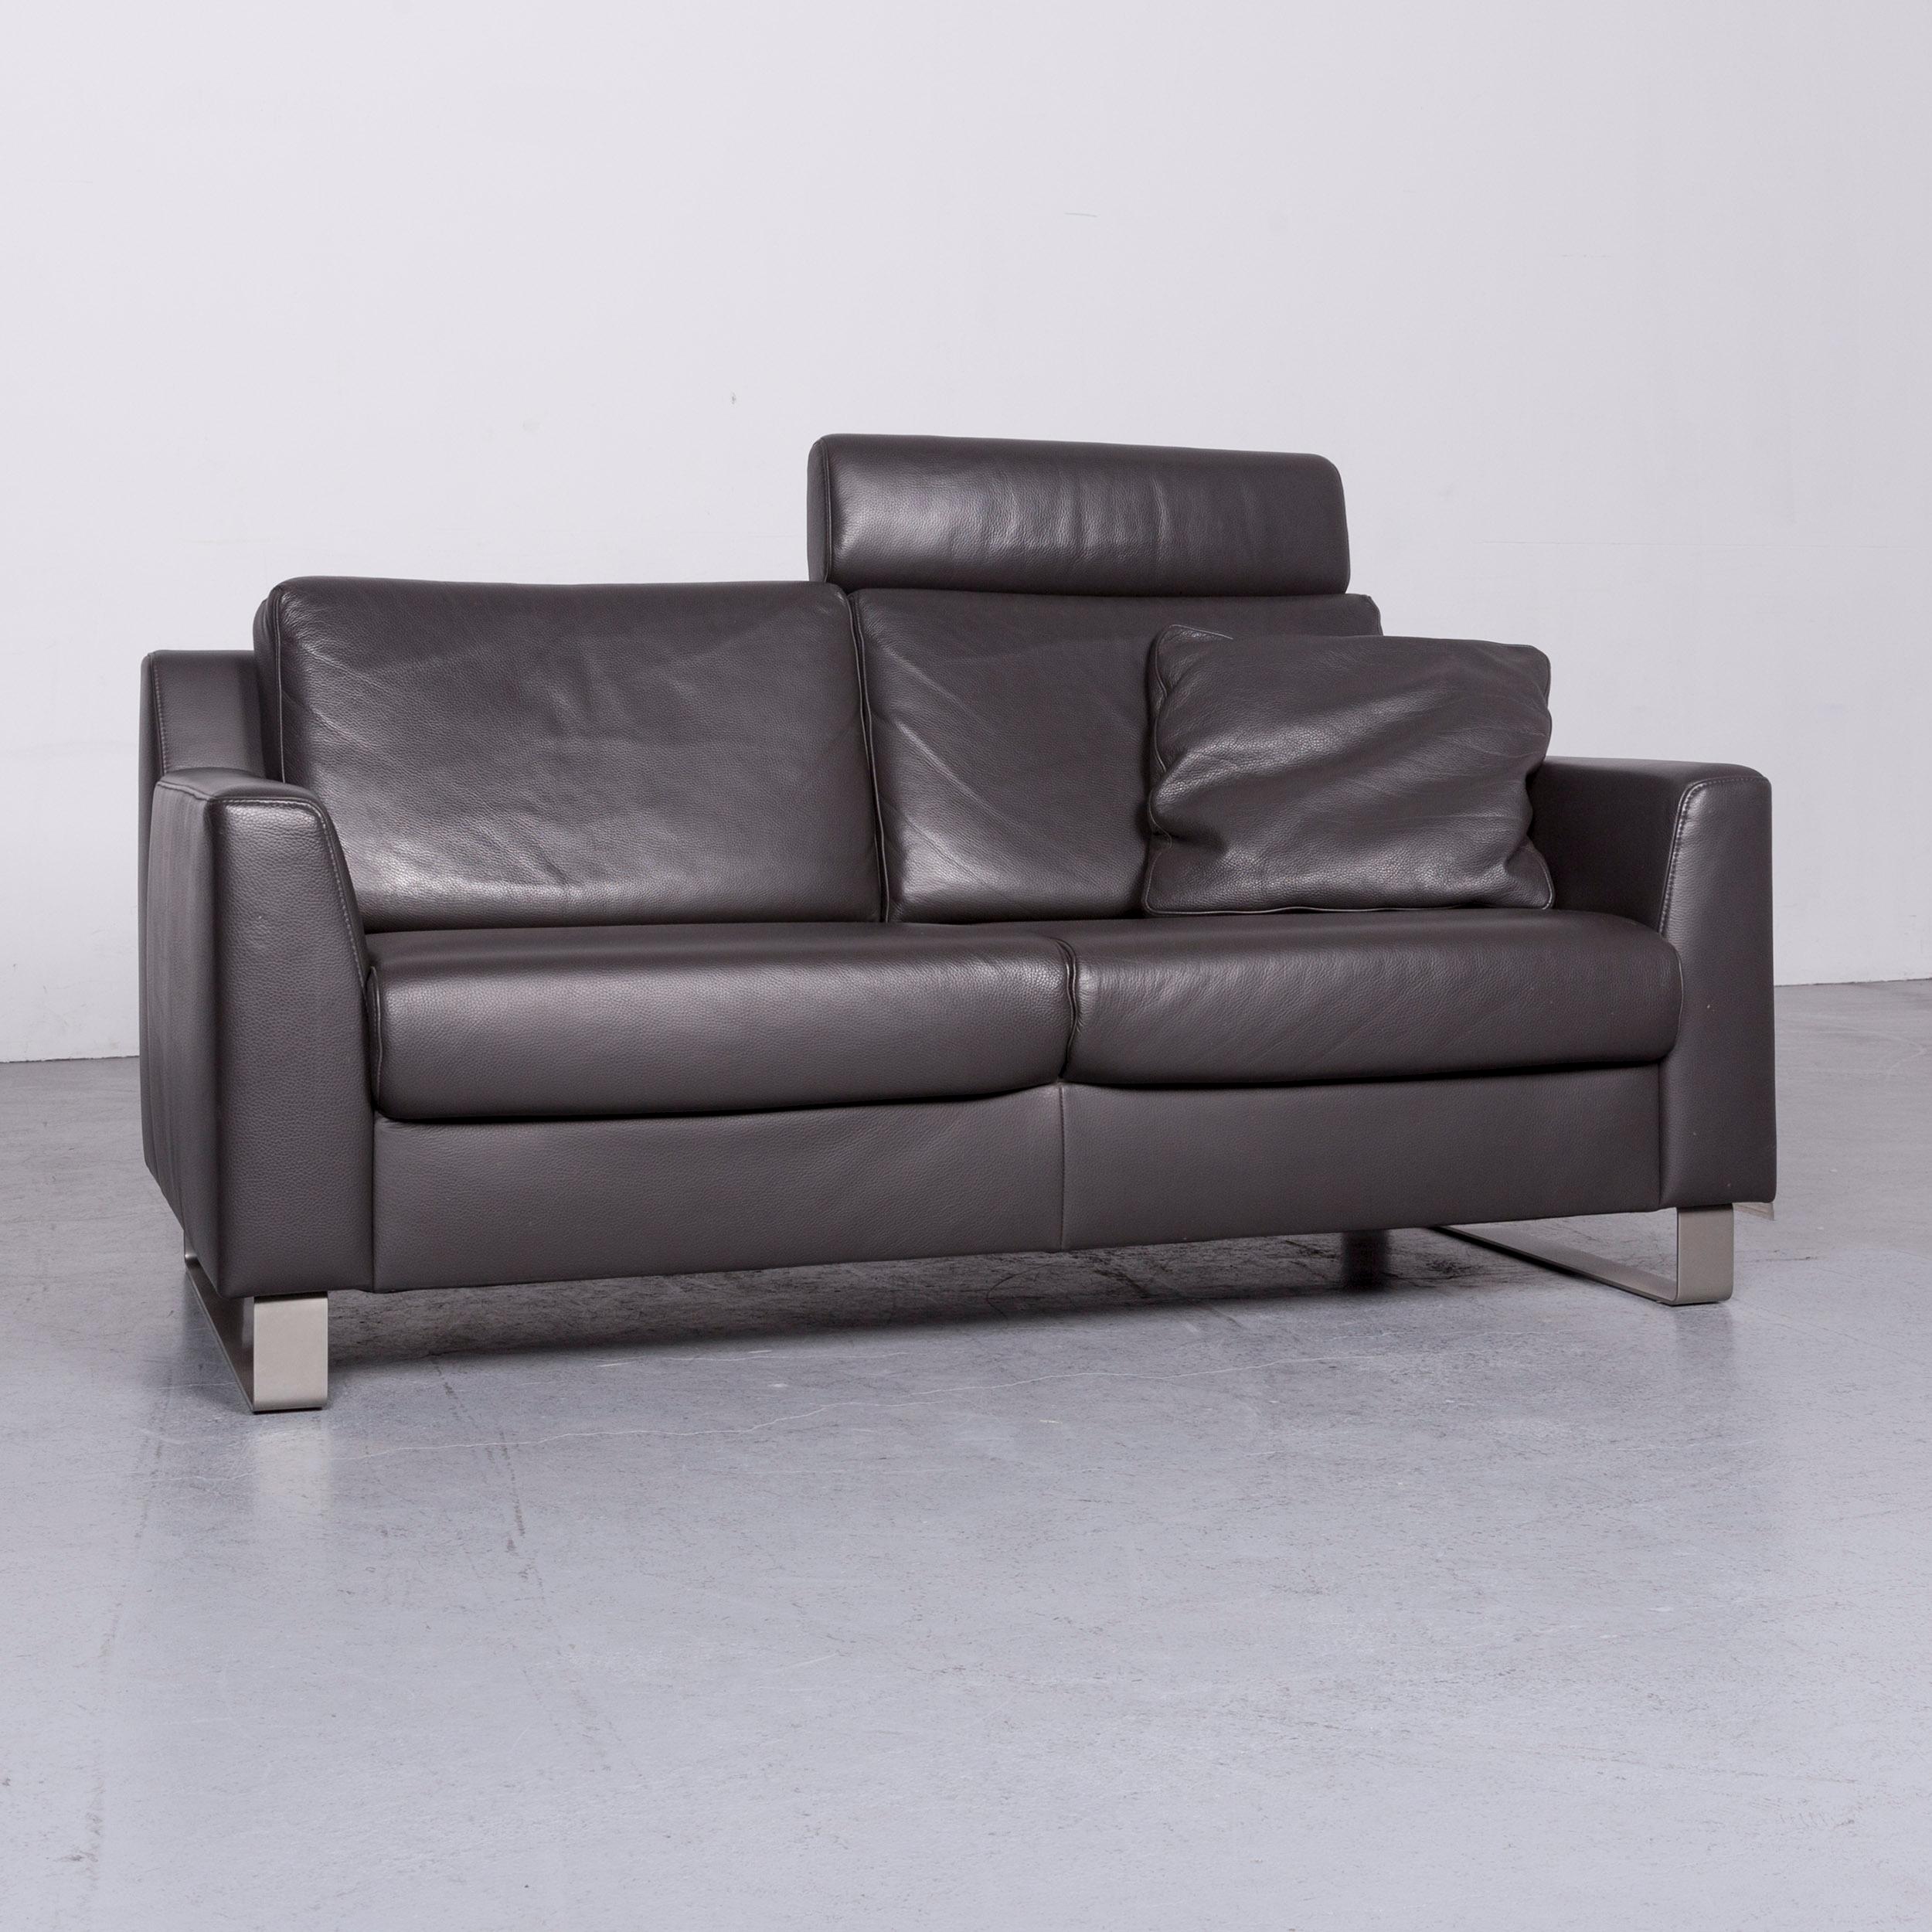 We bring to you an Ewald Schillig designer sofa brown couch leather.